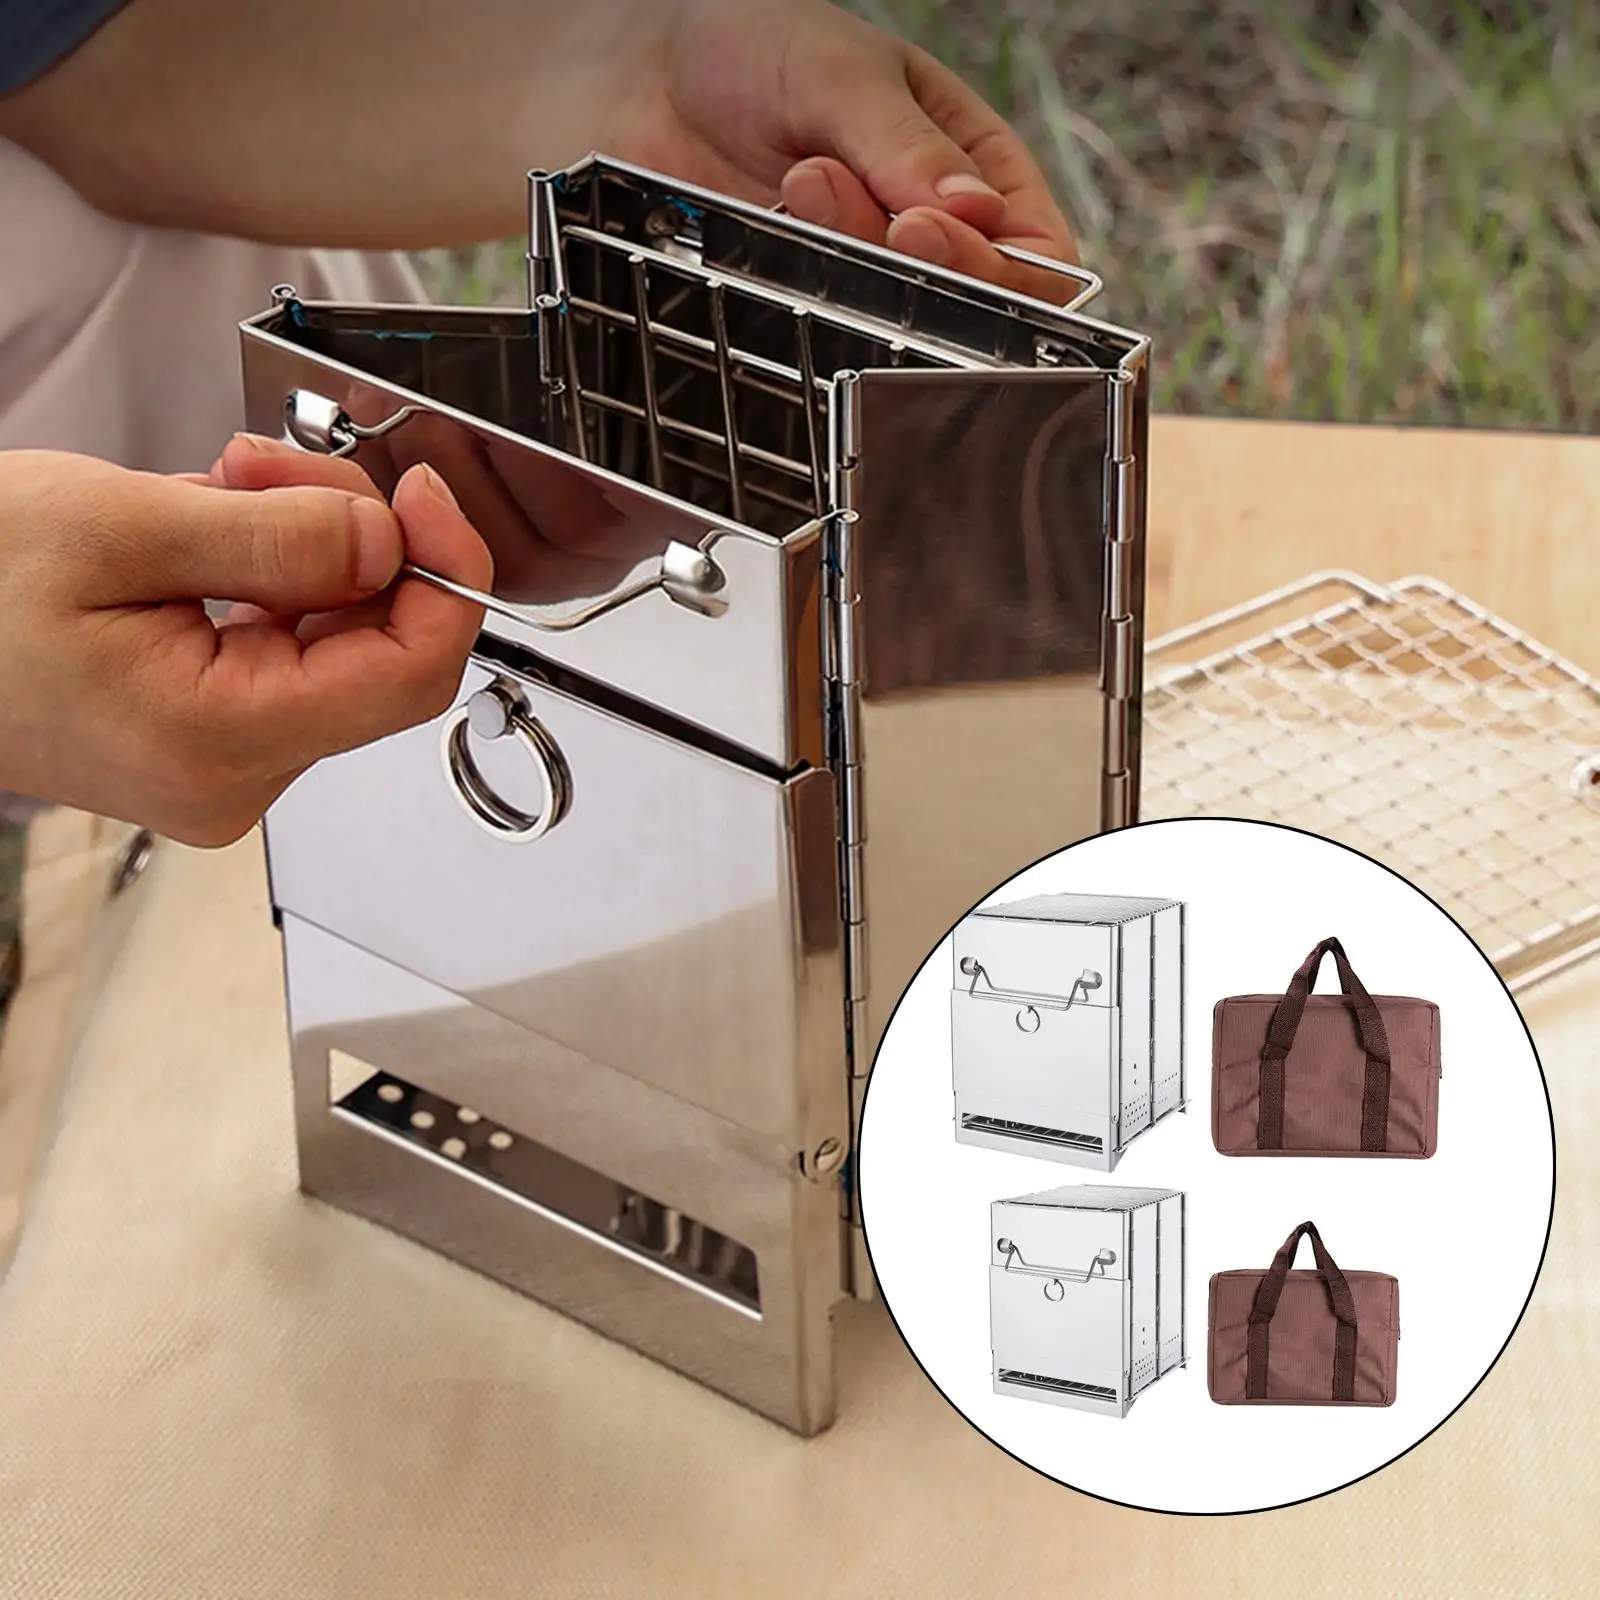 s Stainless Mapper Portable Folding Backpacking Camping Grill Rack Carrier for Camping